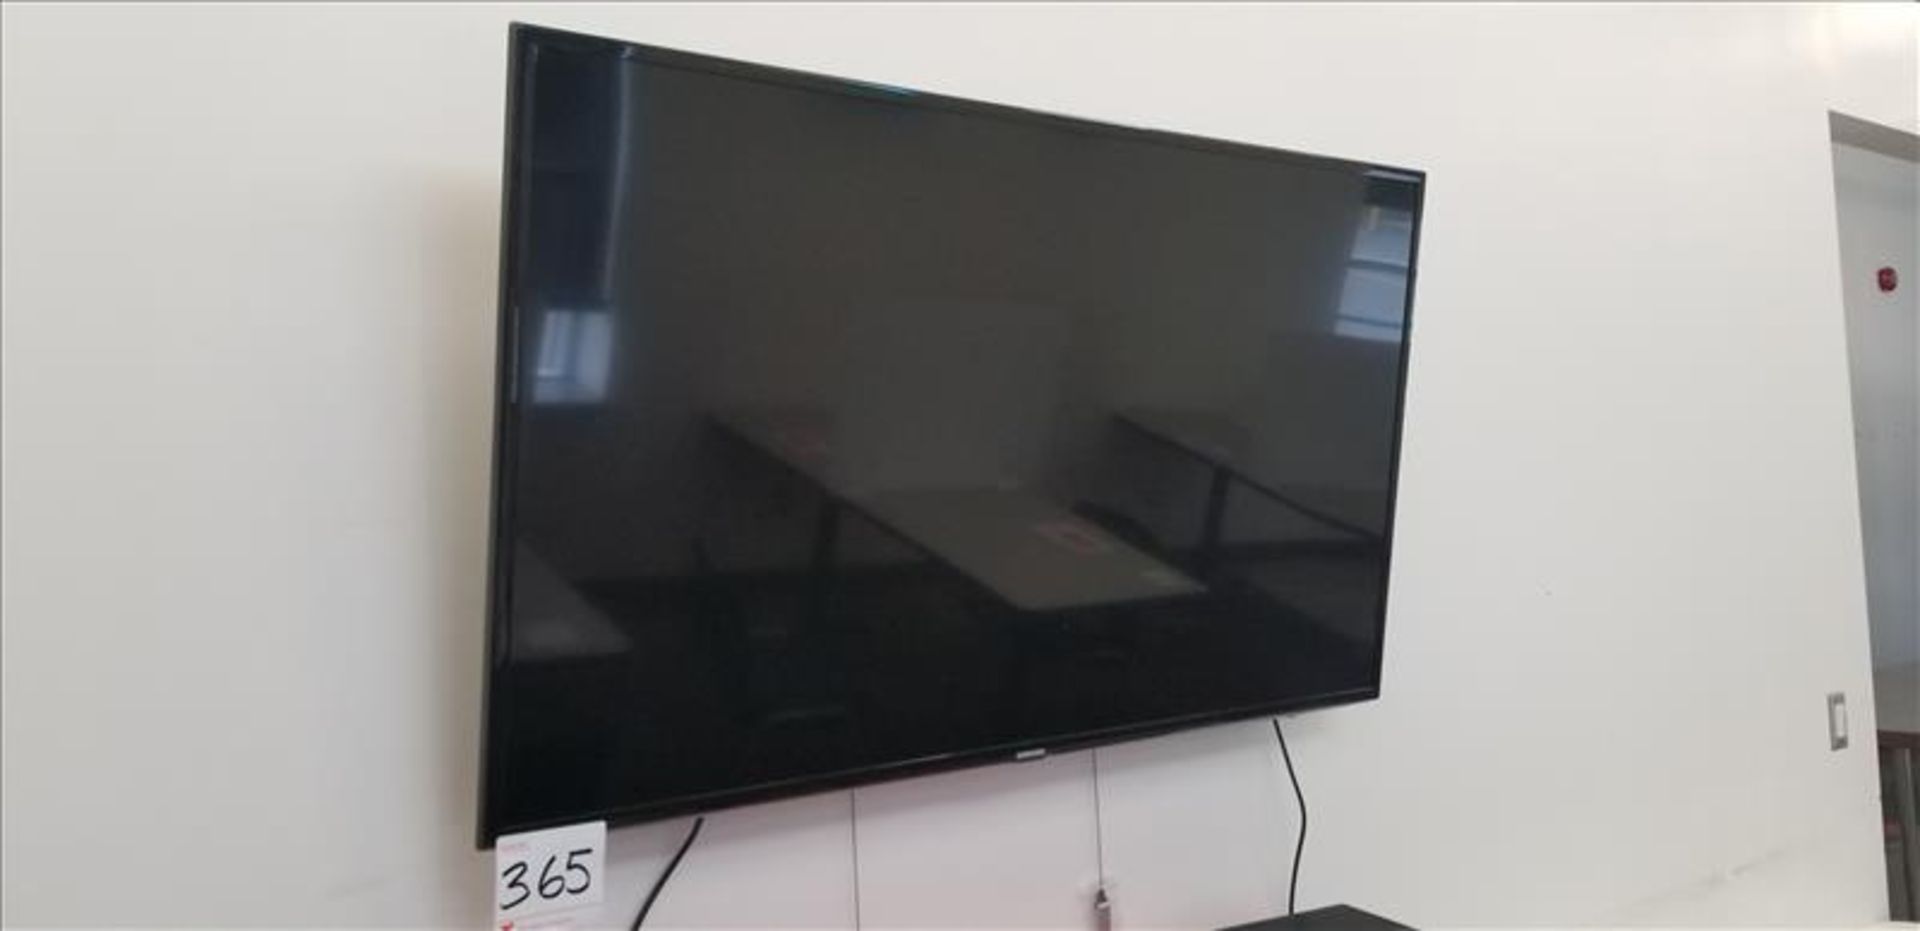 54 in. Samsung Television w/wall mount - Image 2 of 2